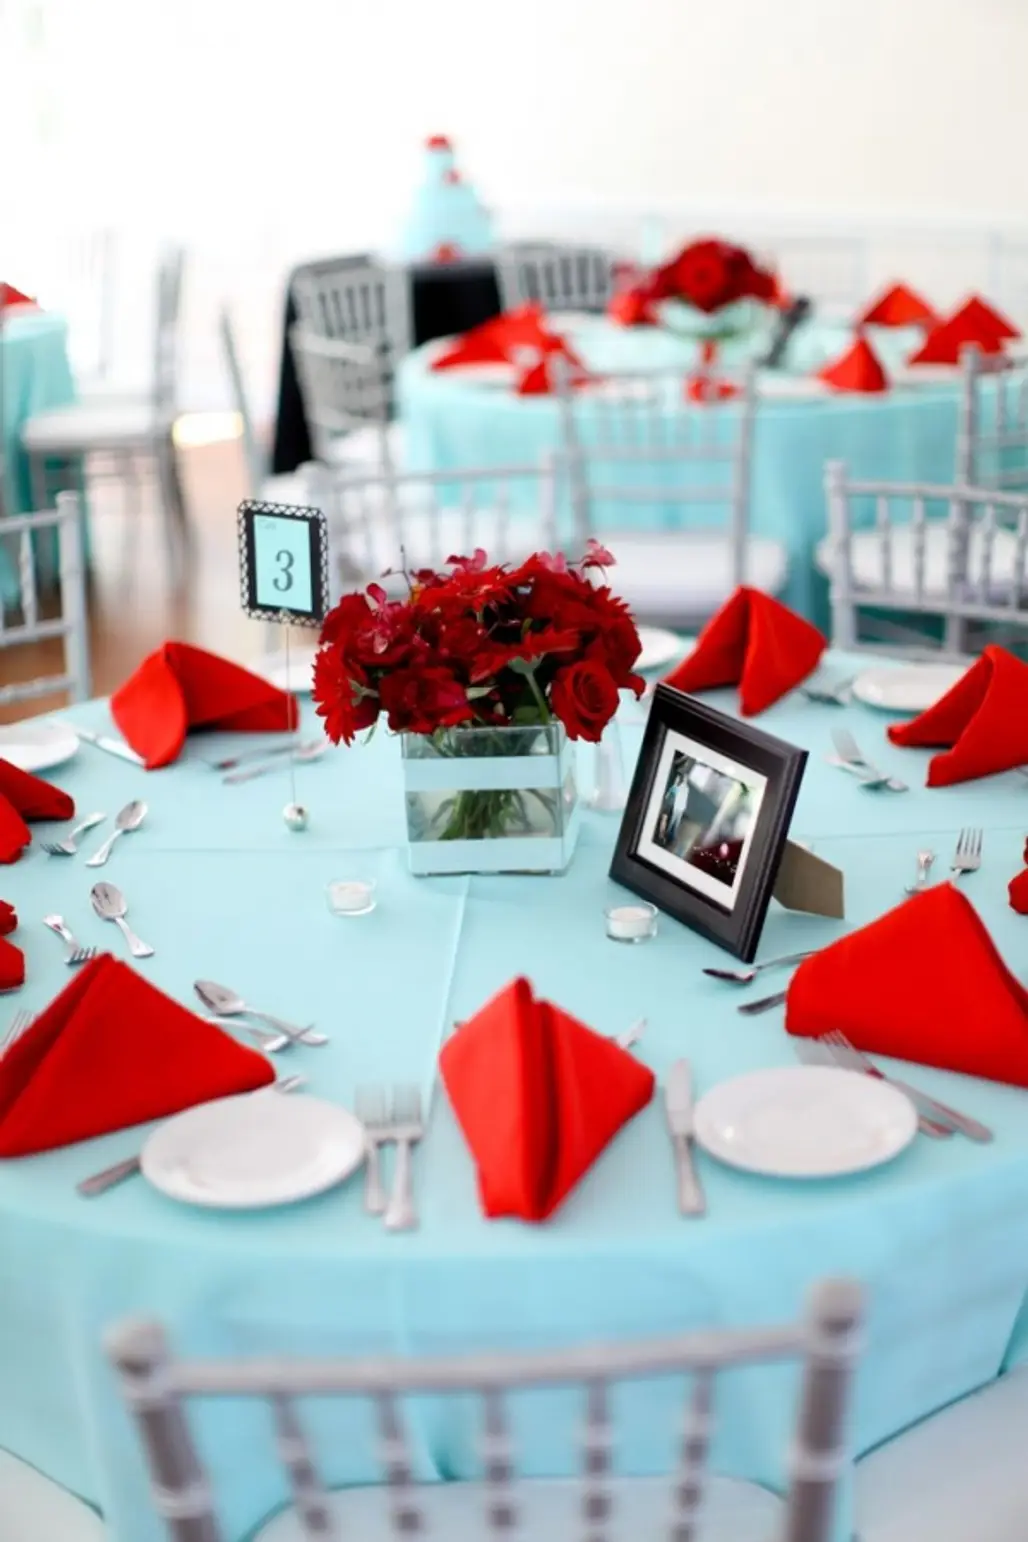 red,party,event,centrepiece,meal,